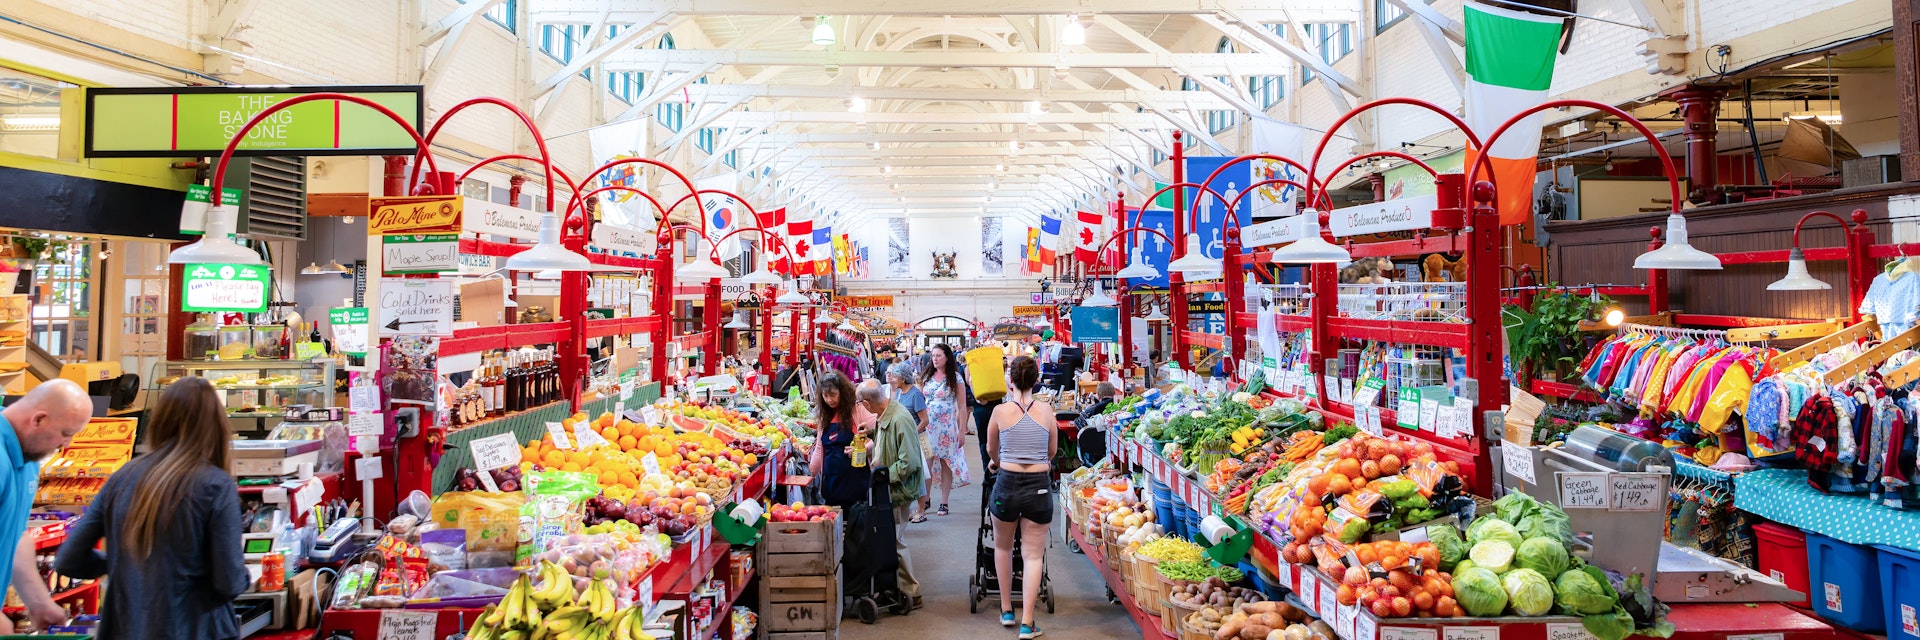 July 20, 2019: Fresh produce on display inside the Saint John City Market.
1164890242
Retail, Copy Space, Architecture, Day, Old, Photography, Food, Agriculture, Travel Destinations, Horizontal, Bright, Famous Place, St. John - New Brunswick, Tourist, Farmer's Market, Indoors, Travel, Store, Tourism, History, City, Flag, Cultures, Canada, People, Shopping, Fruit, Business, Multi Colored, Building, Tradition, Market - Retail Space, Built Structure, New Brunswick - Canada, Vegetable